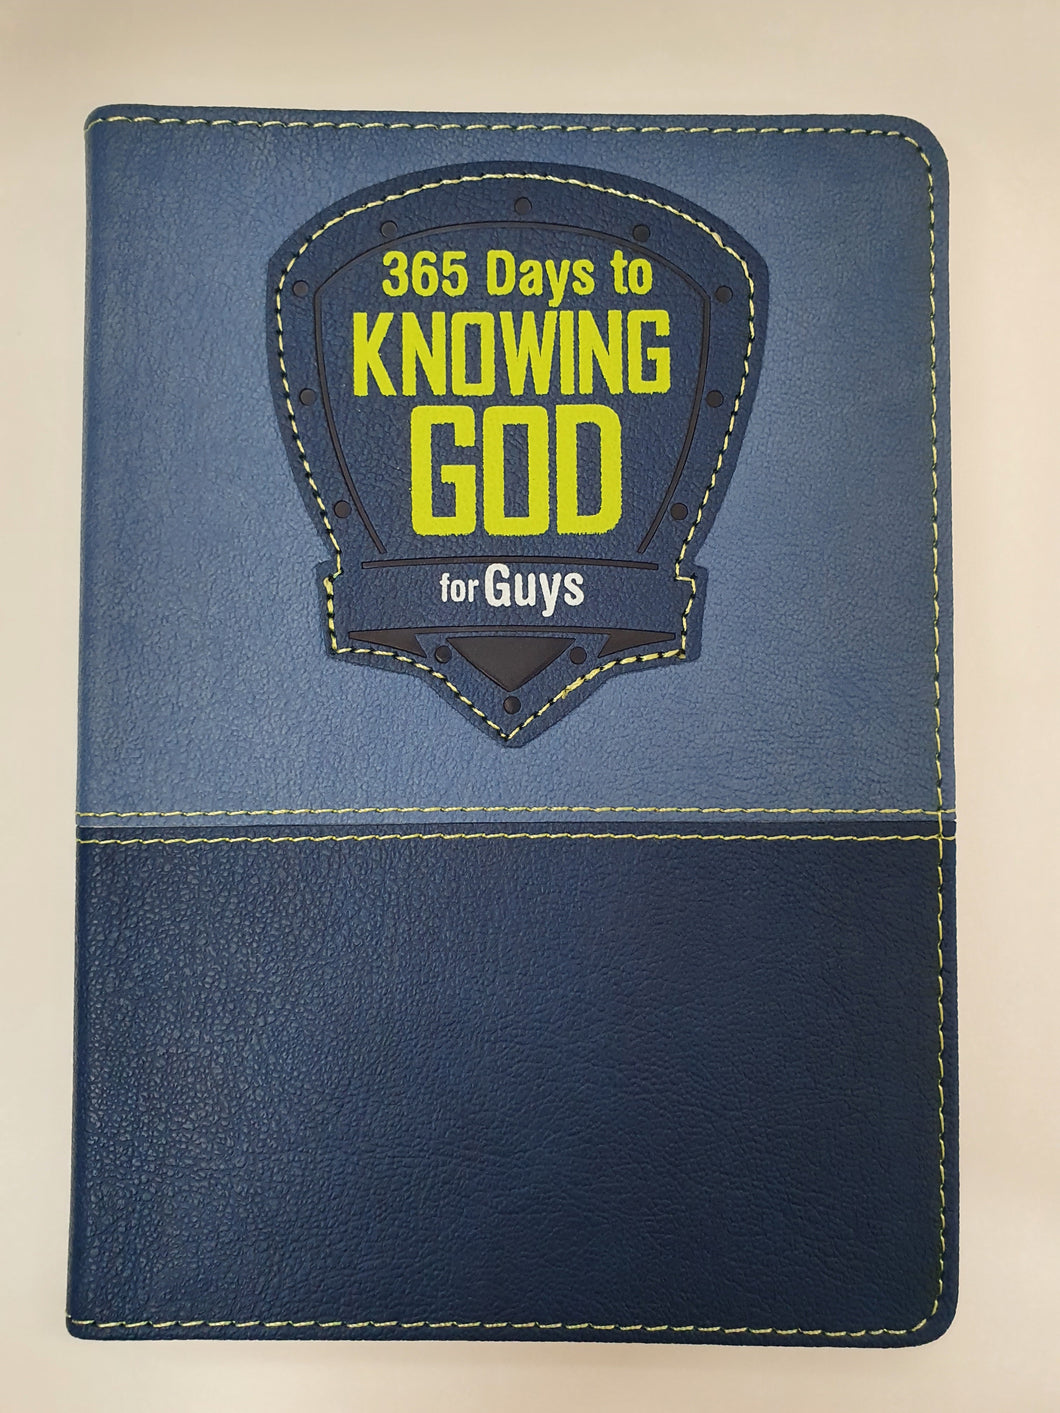 365 Days to Knowing God for Guys - Lux Leather Edition